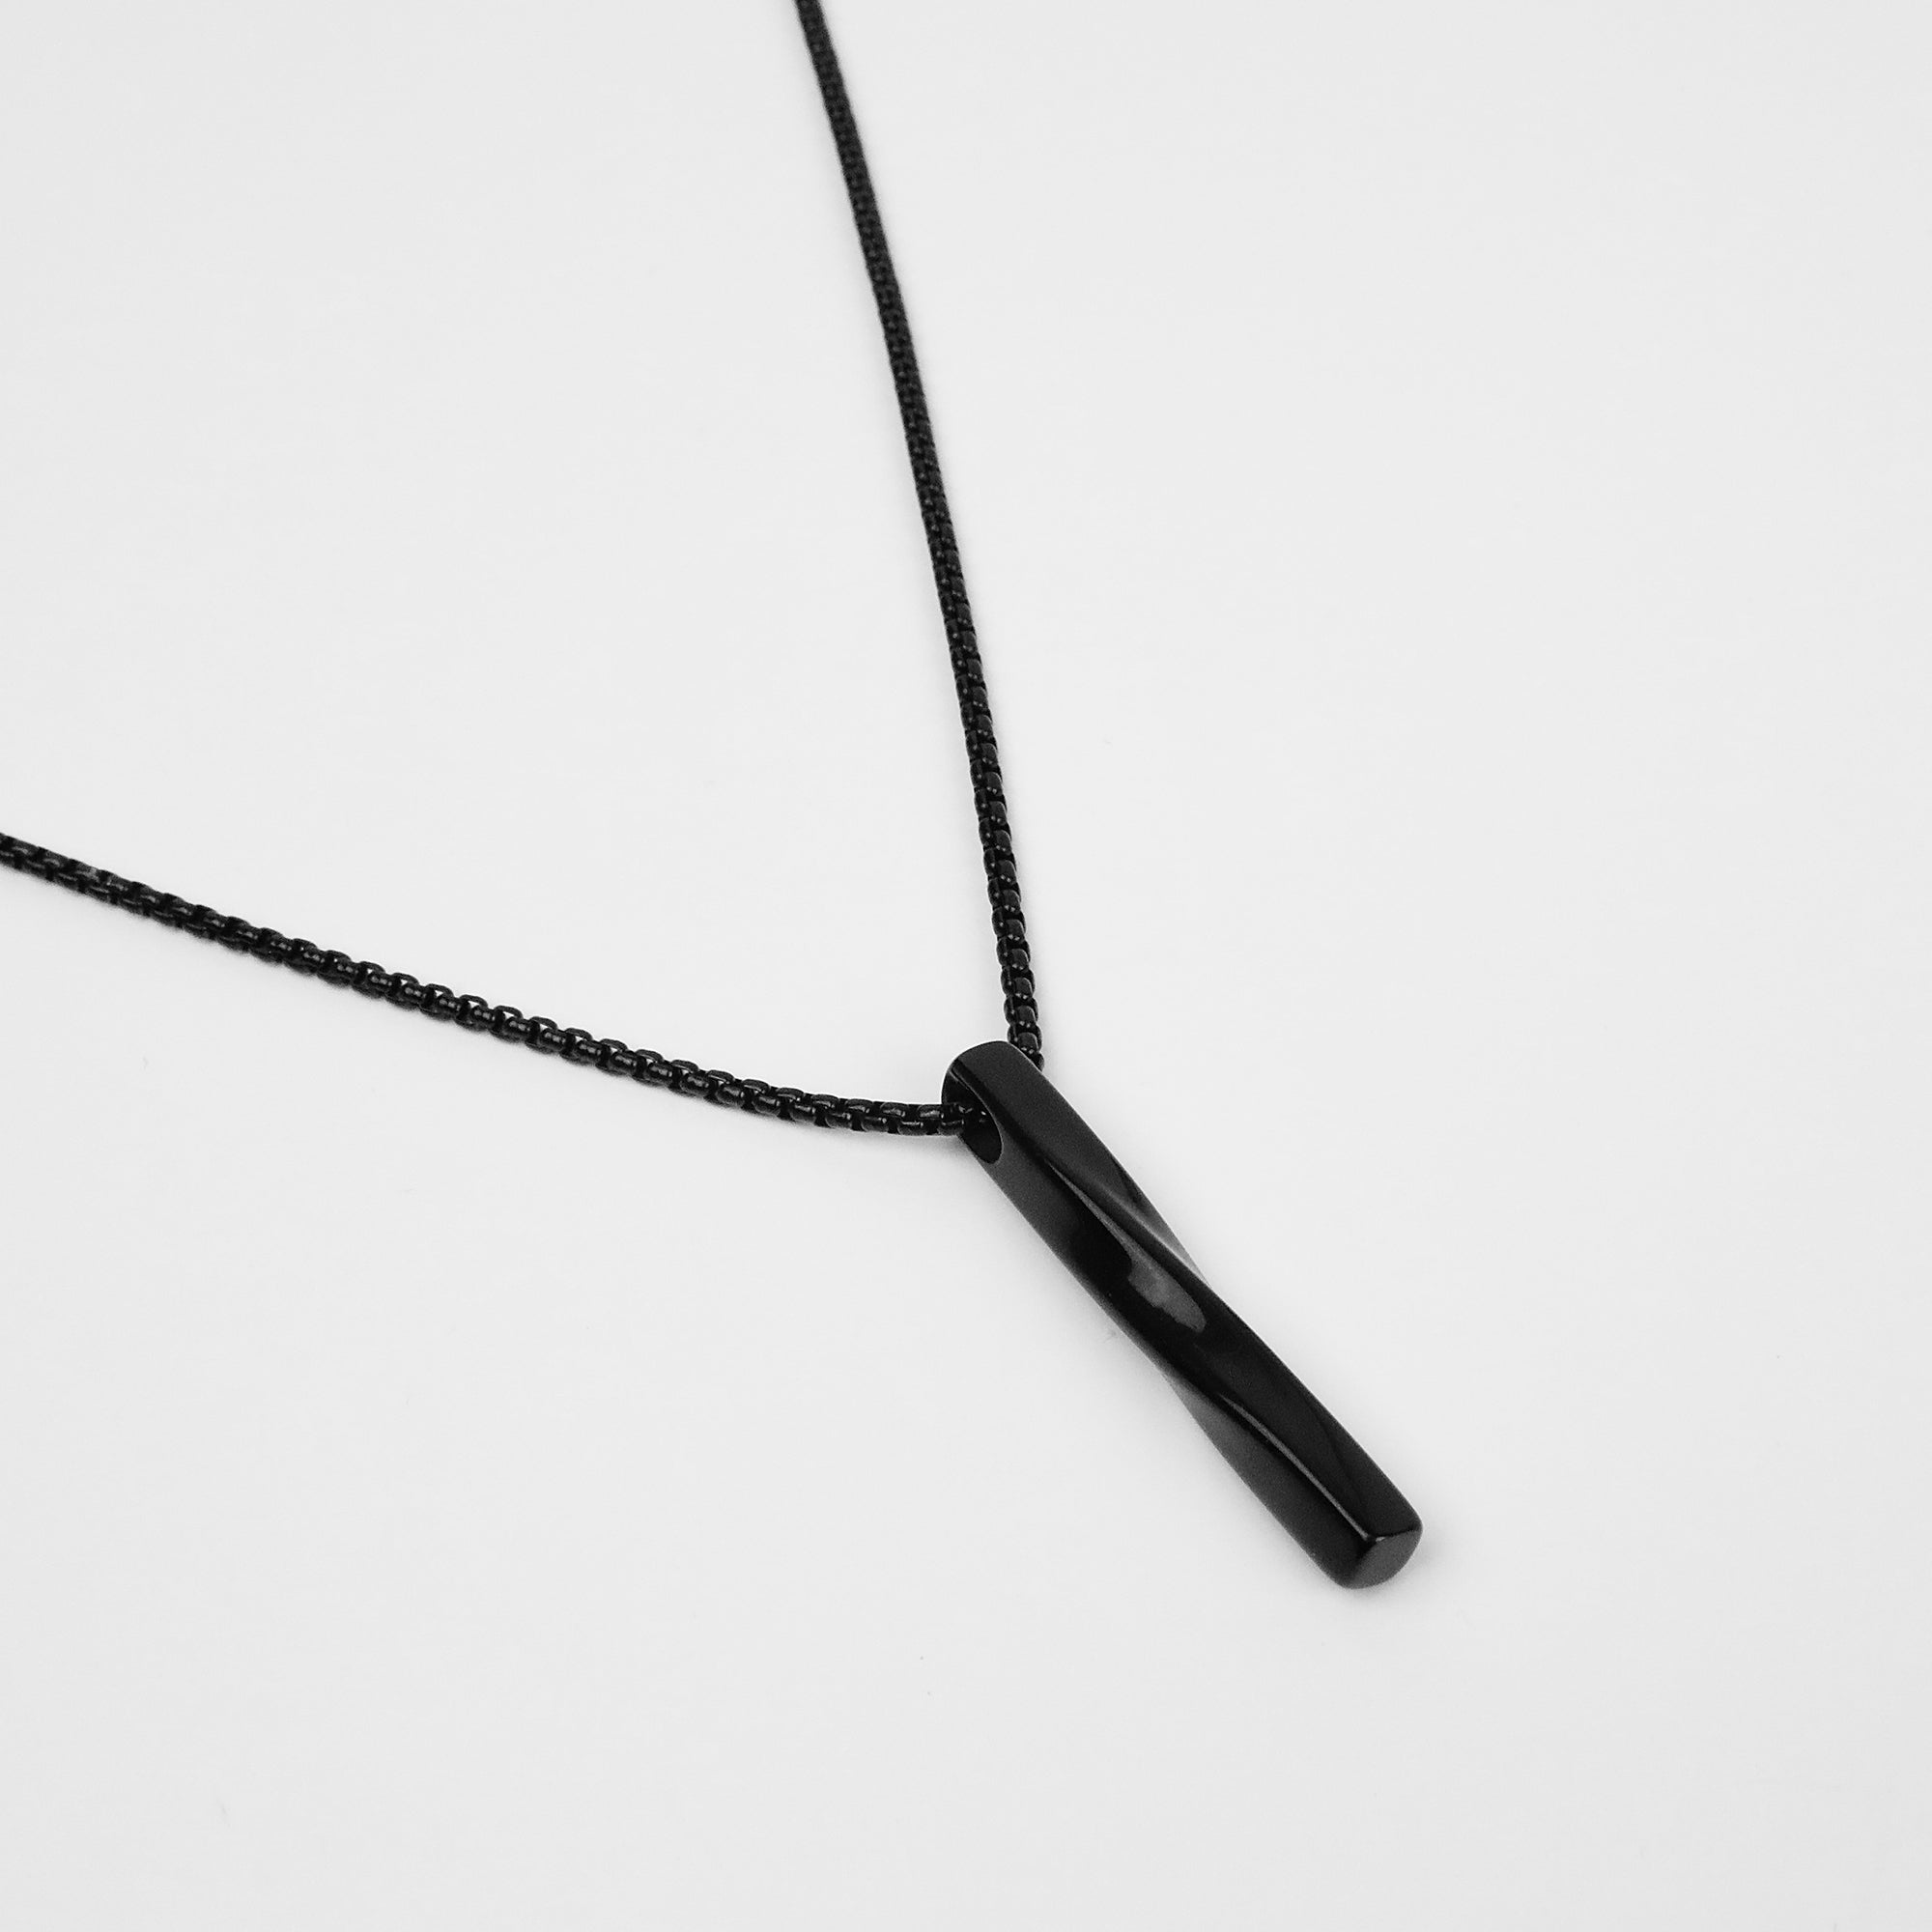 Twisted Bar Necklace - Black